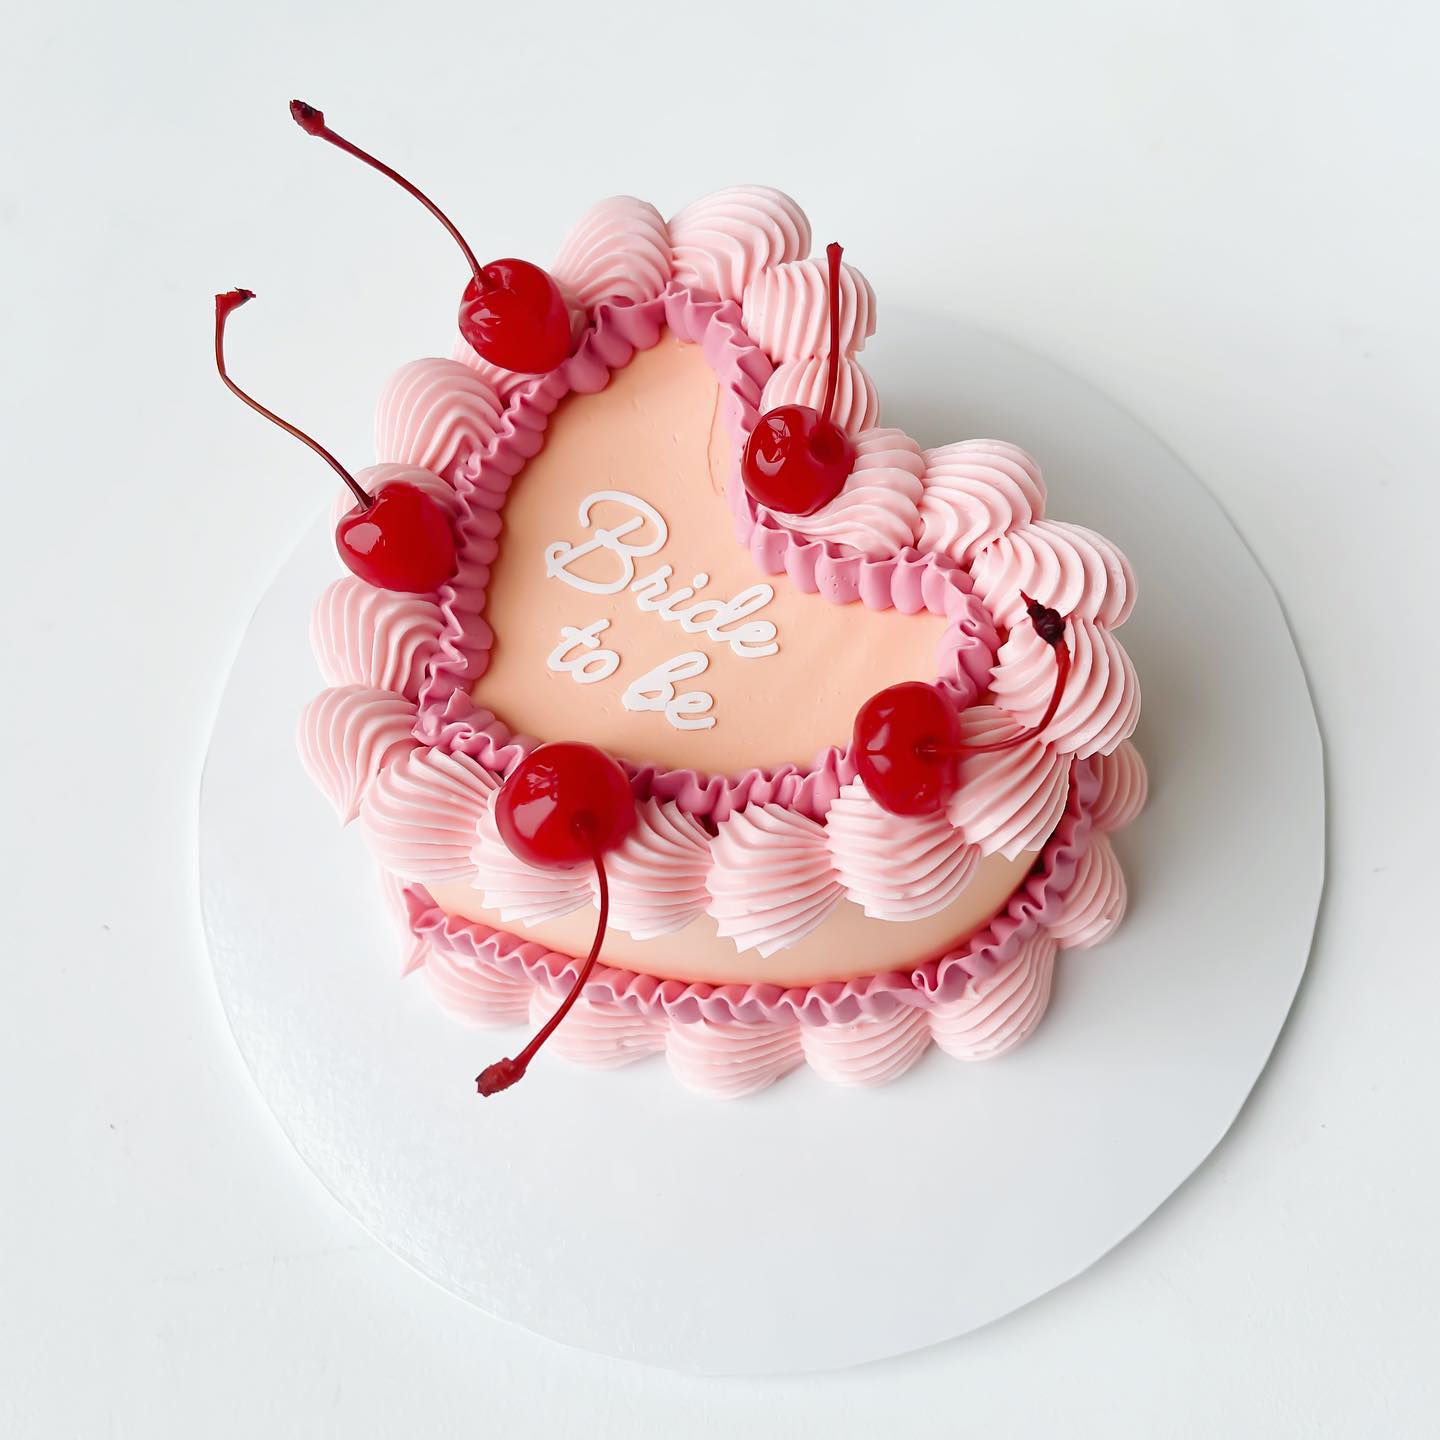 Heart Cake For St Valentines Day Mothers Day Or Birthday Decorated With  Sugar Hearts Stock Photo - Download Image Now - iStock